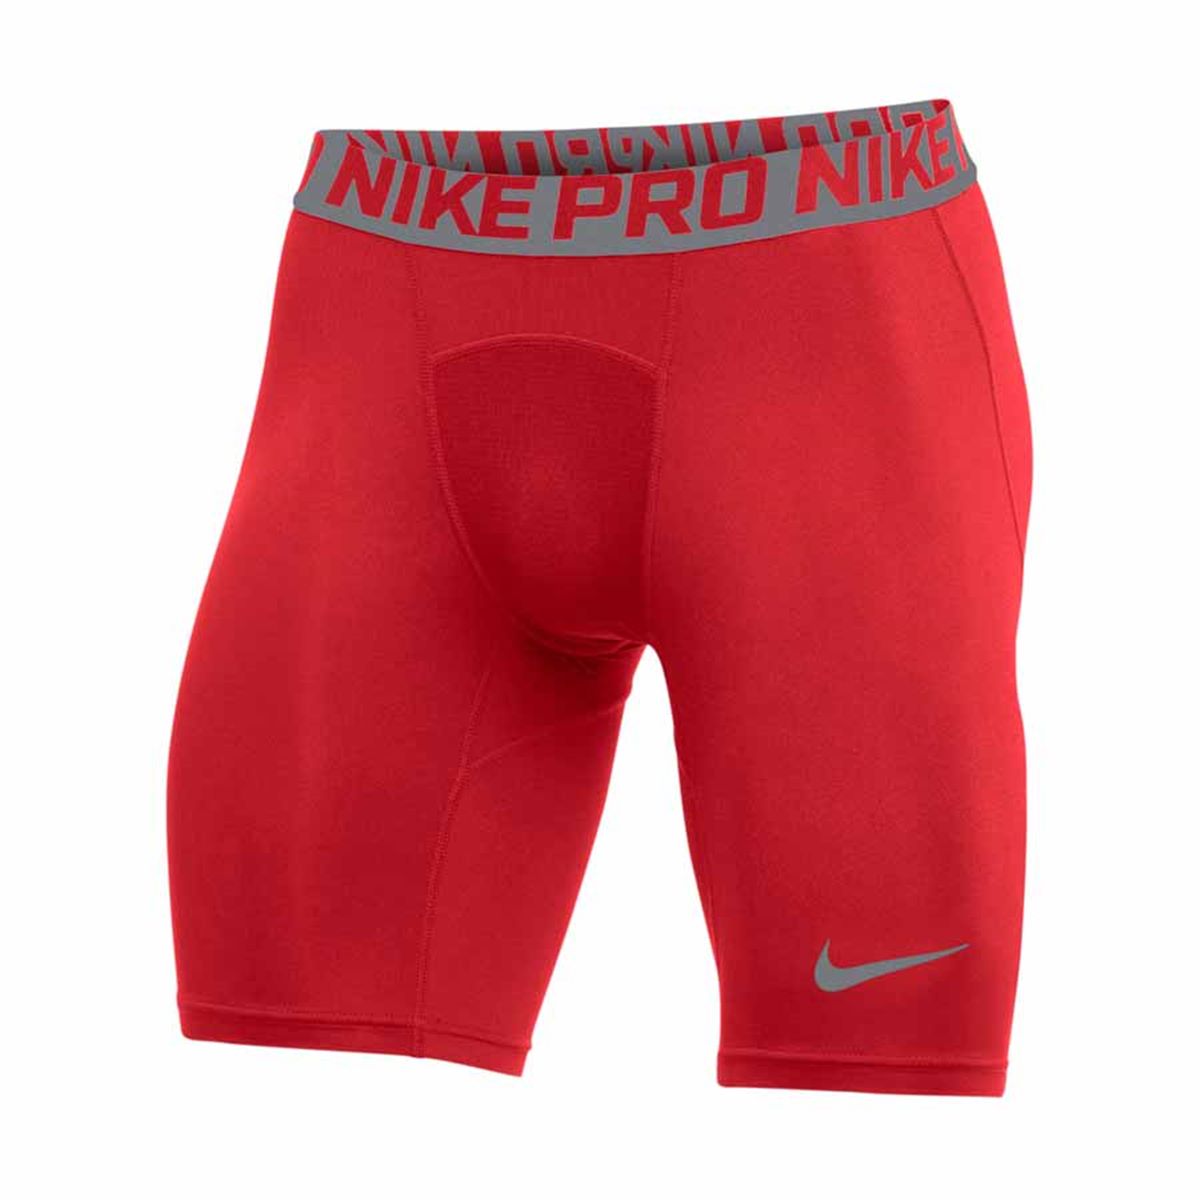 11 Incredible Nike Men’s Compression Shorts For 2023